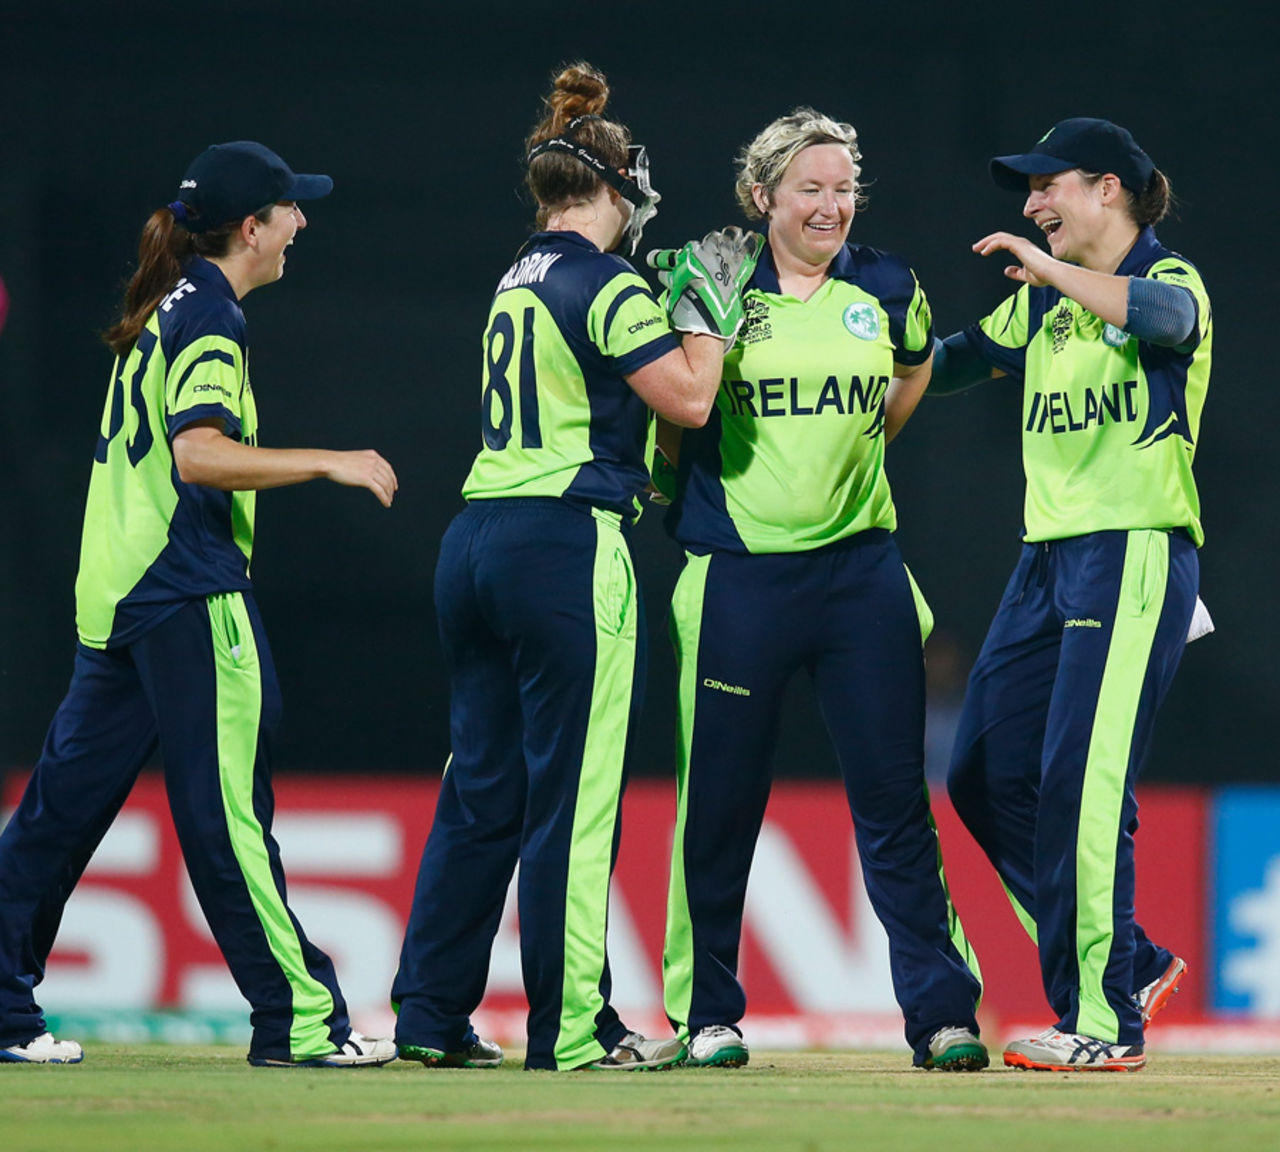 Ireland Women players celebrate a wicket, Ireland v South Africa, Women's World T20 2016, Group A, Chennai, March 23, 2016